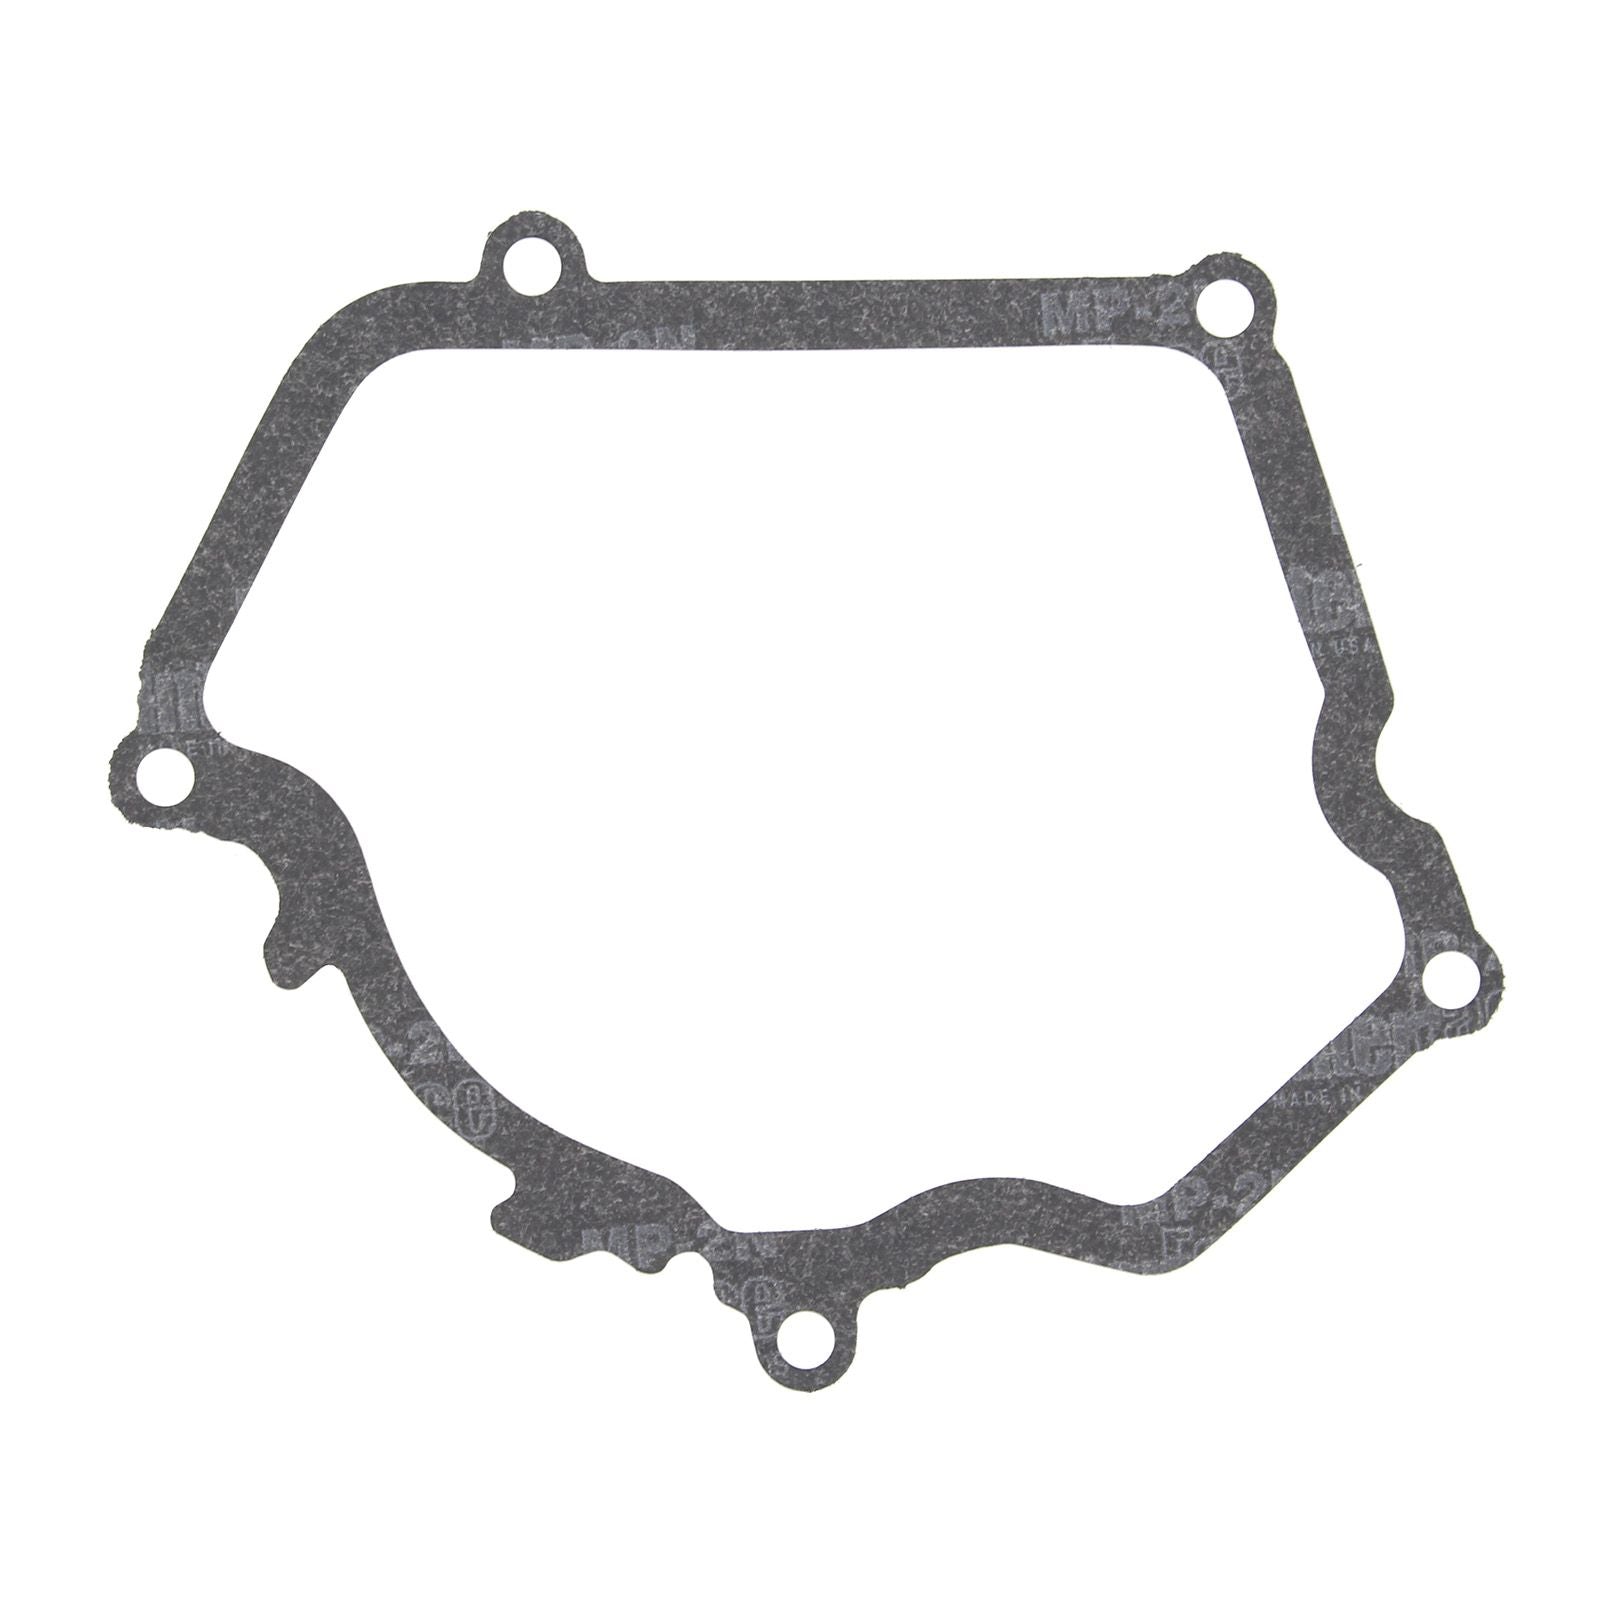 New VERTEX Ignition Cover Gasket For Yamaha #VER817675